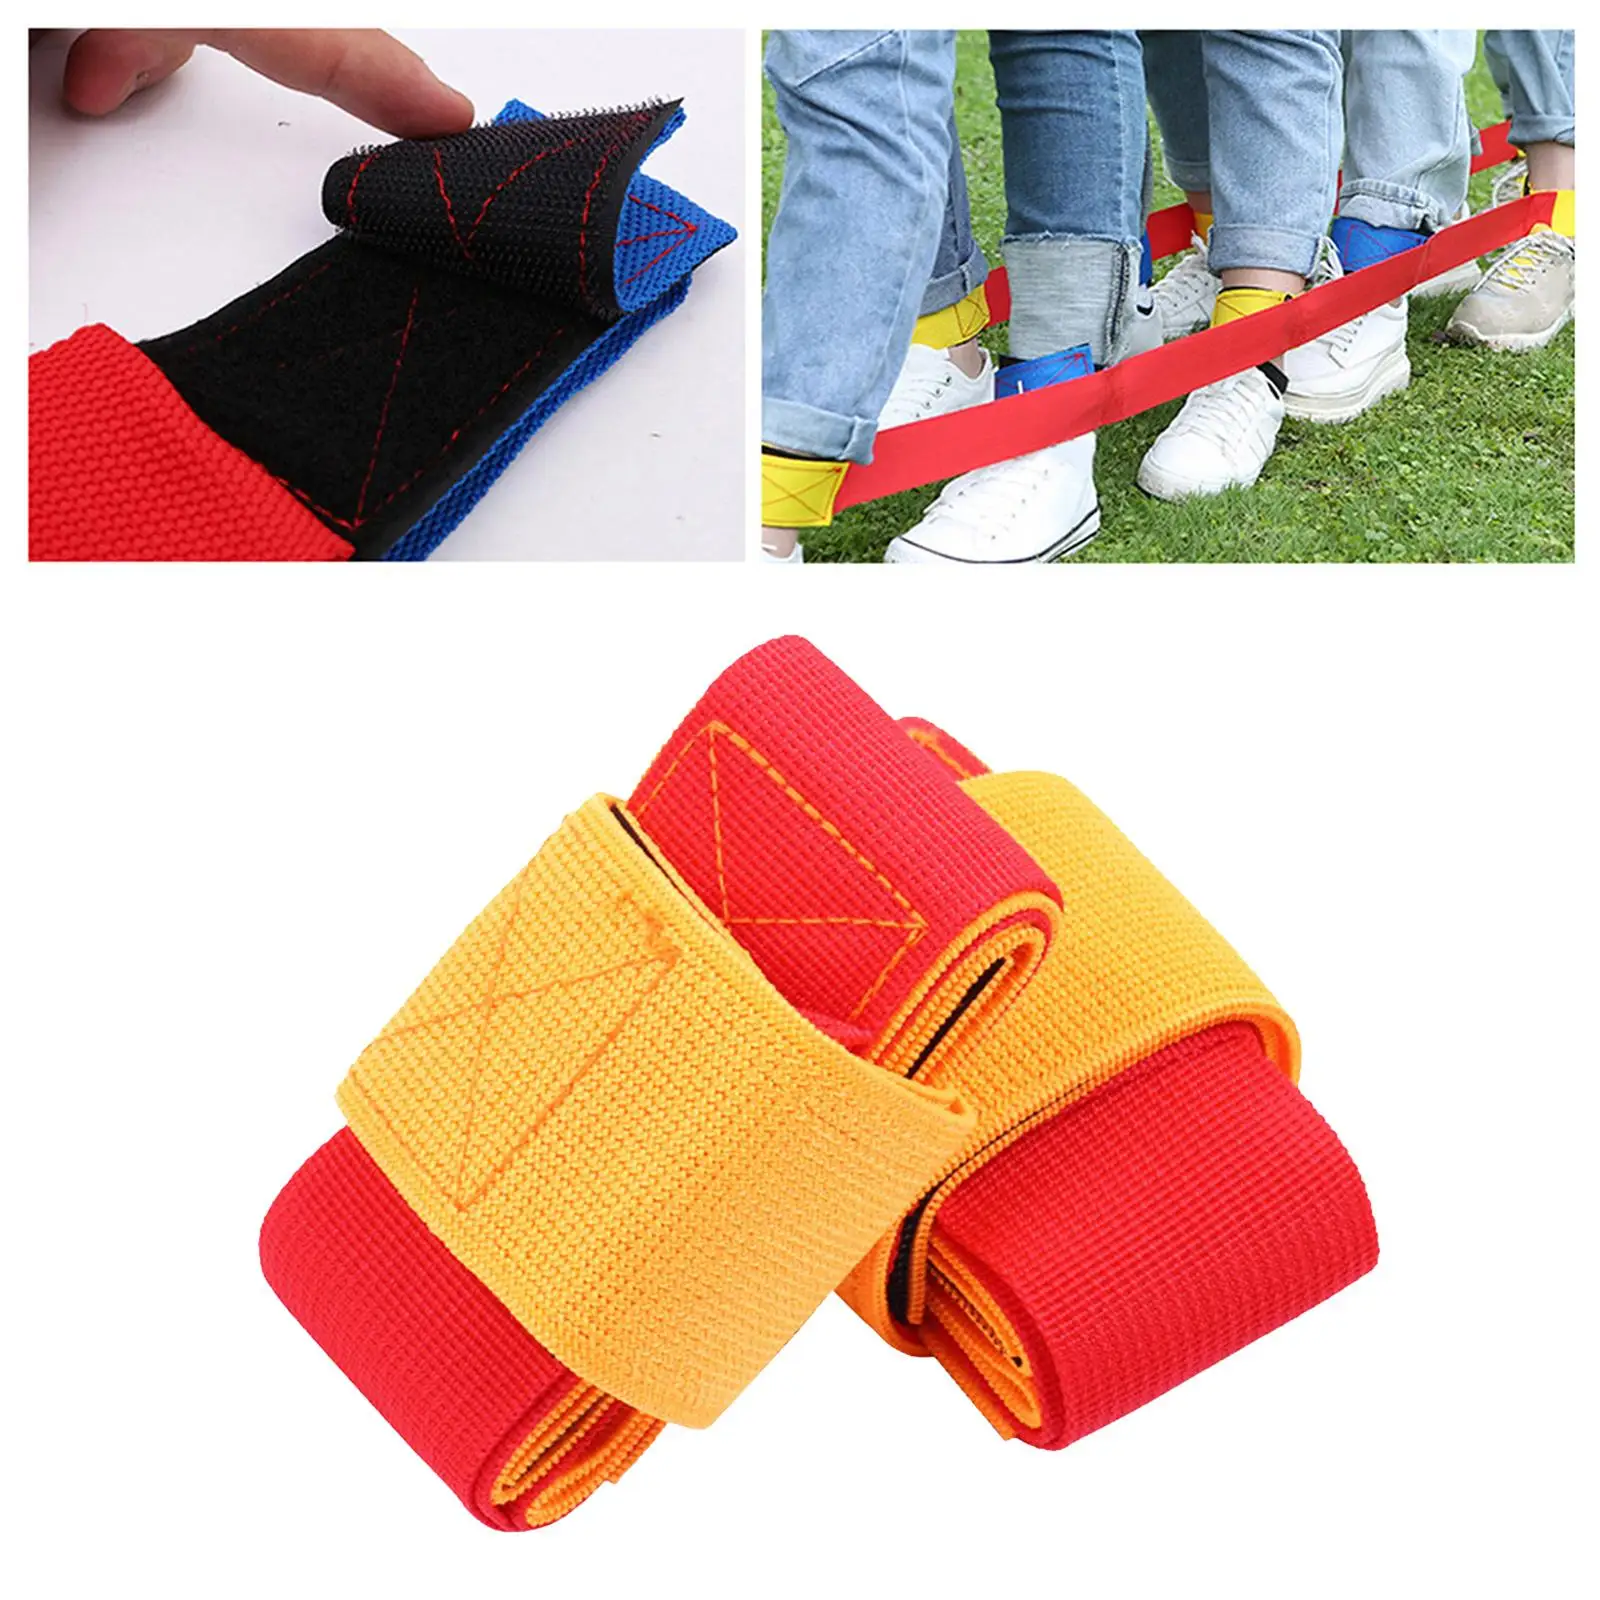  3-Legged Race Bands Elastic Tie Rope Perfect for Relay Race Game, Carnival, Field Day, Backyard for Teamwork Kids 